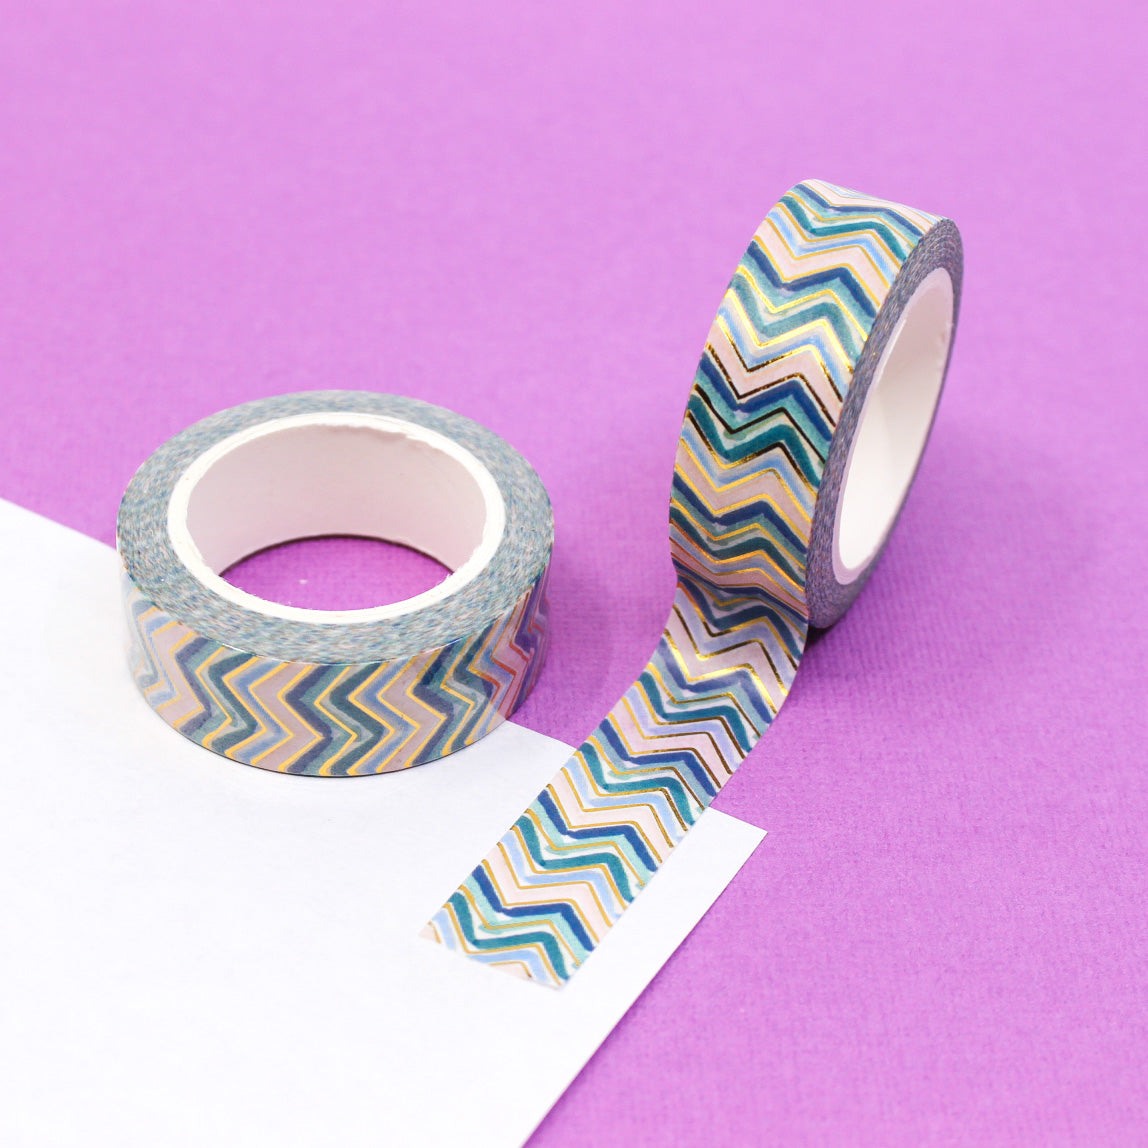 Pastel Spring Chevron Washi: A delightful washi tape featuring a soft, pastel-colored chevron pattern, perfect for adding a touch of spring to your crafts and projects. This washi tape is sold at BBB Supplies Craft Shop.